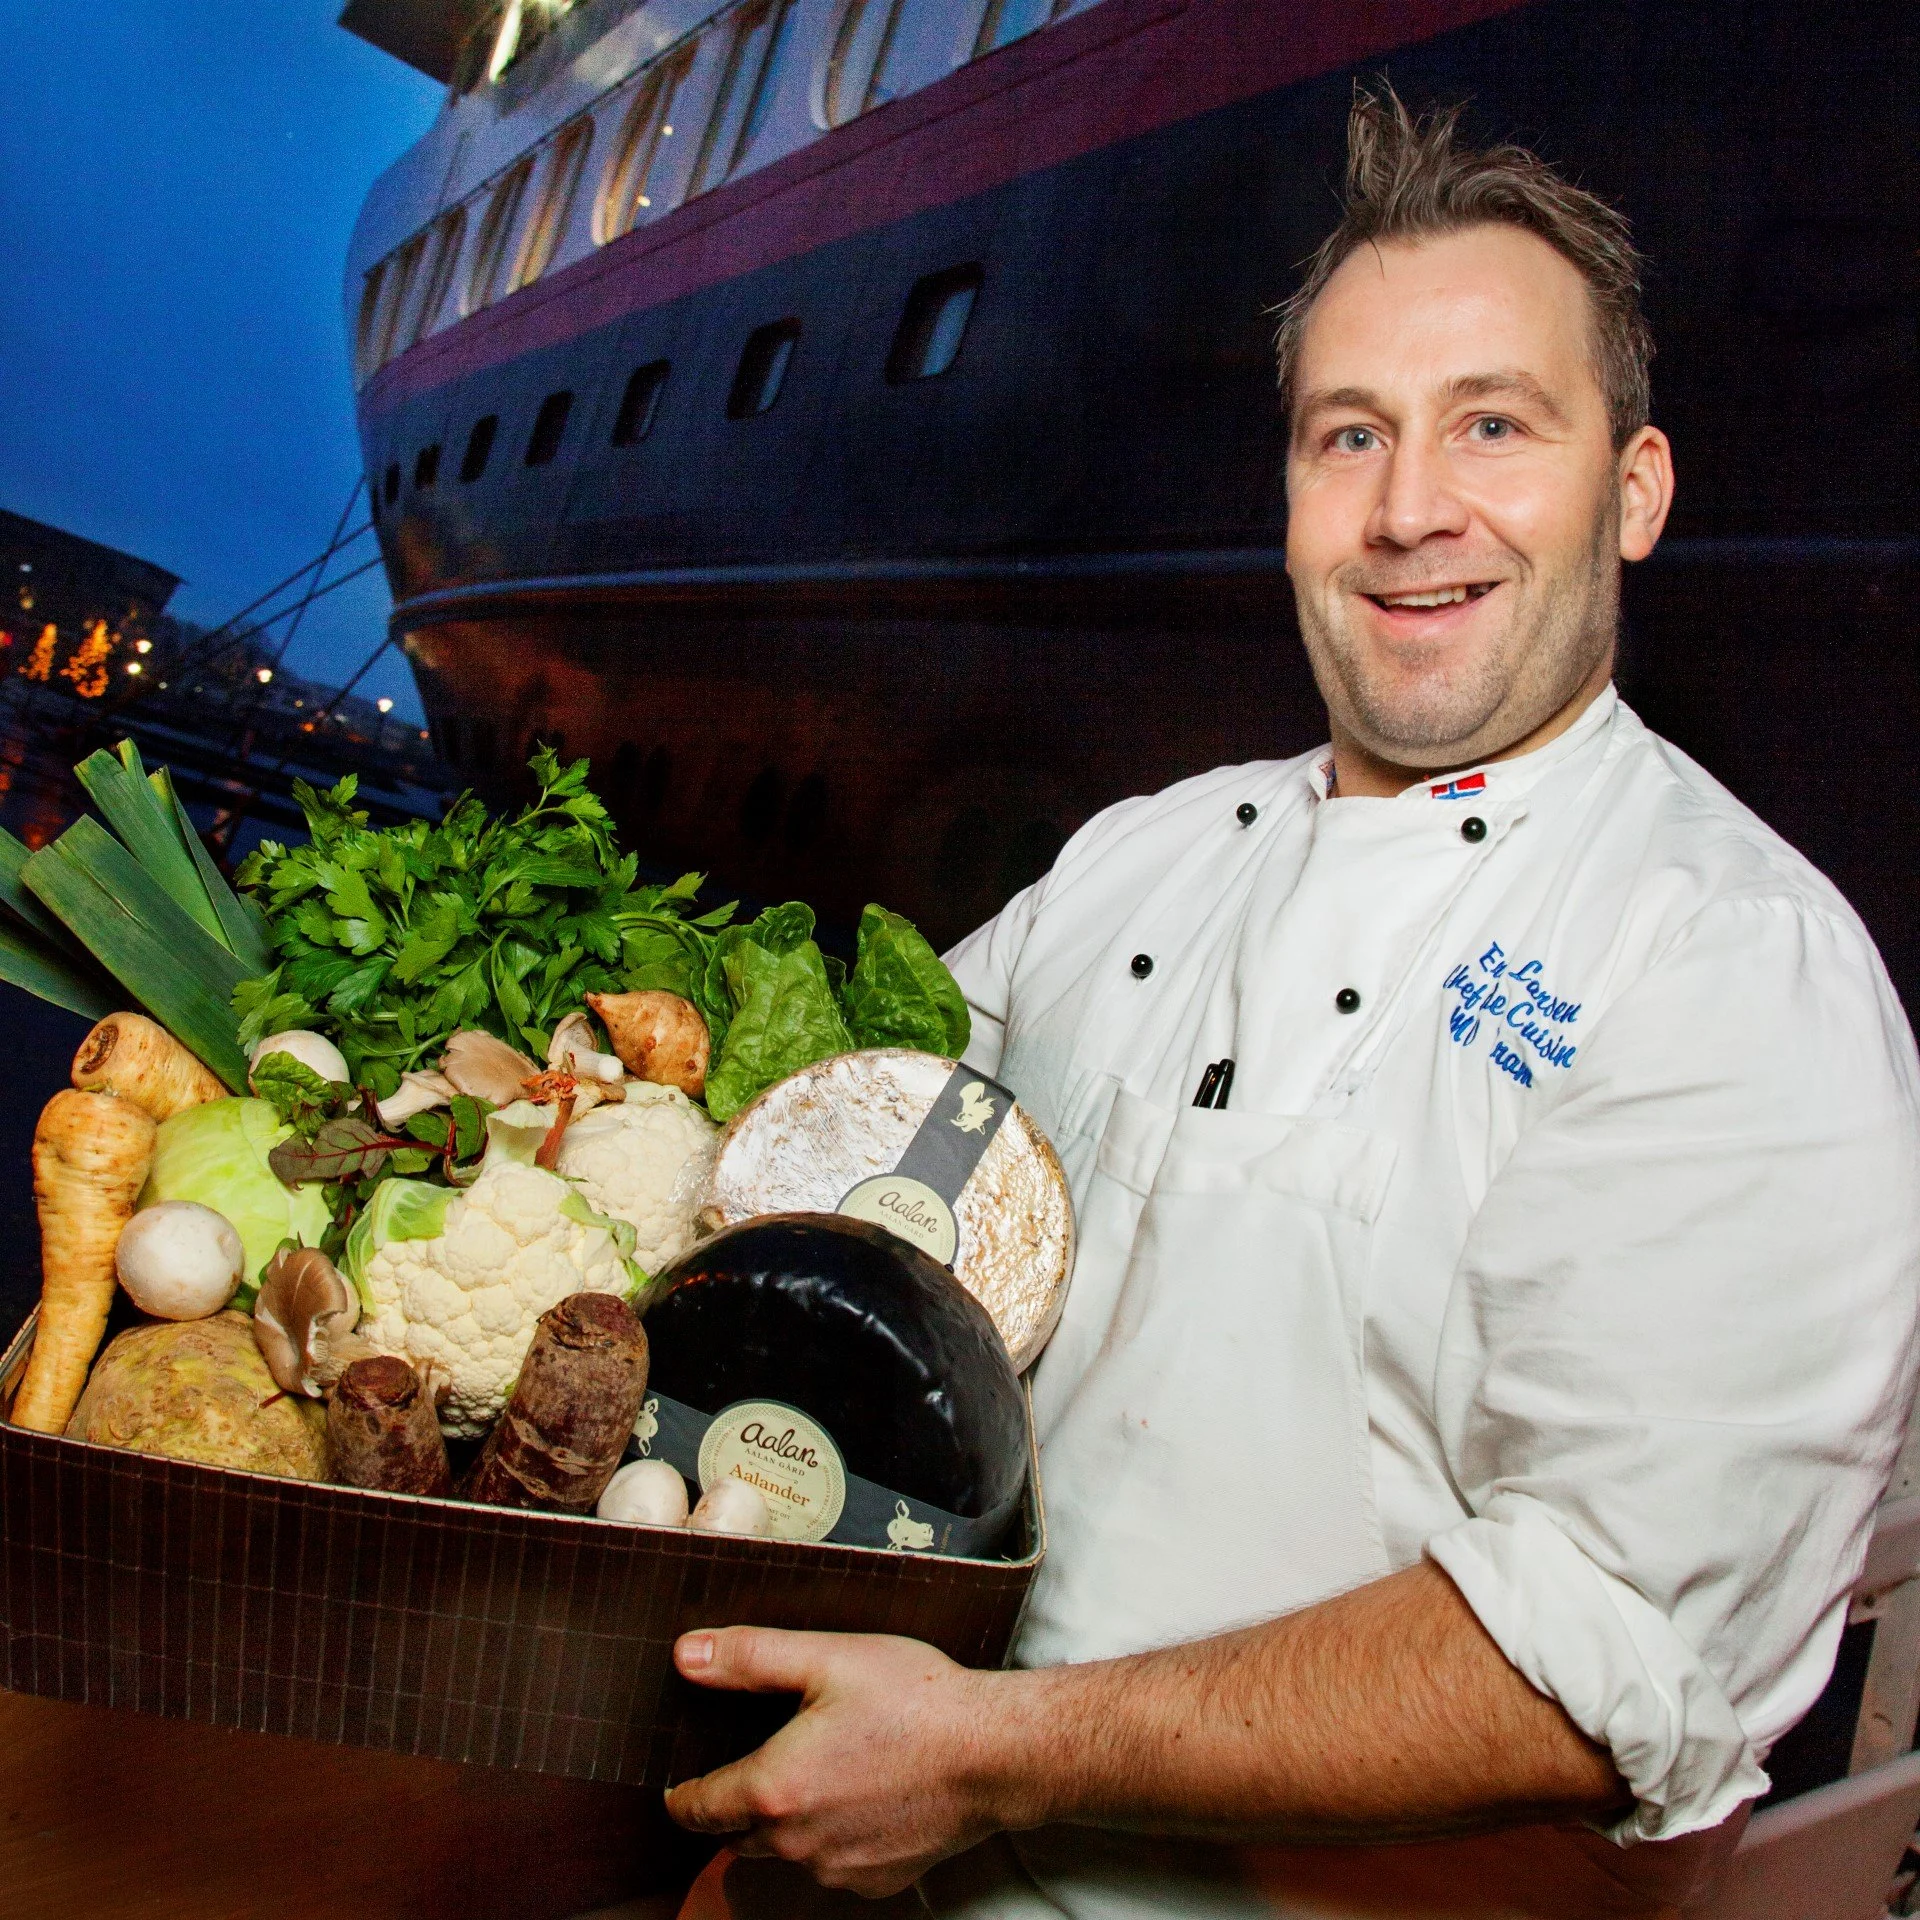 A Hurtigruten Chef about to board the ship. He is holding a big tray of local goods. Vegetables and cheese mostly.